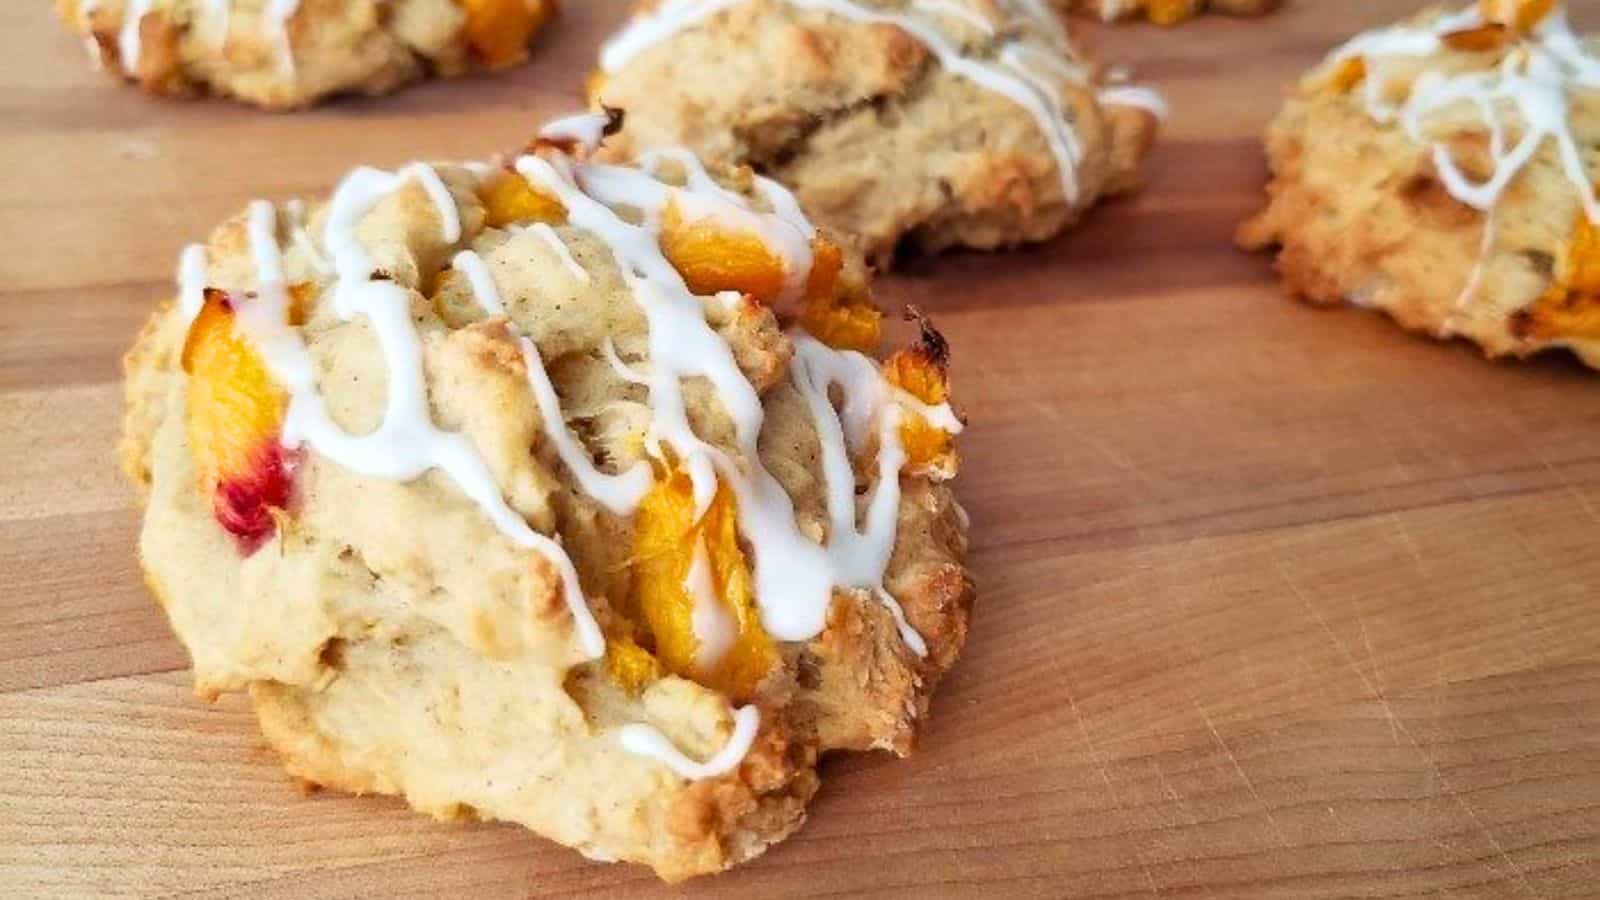 Image shows  Peach scones with icing on a cutting board.